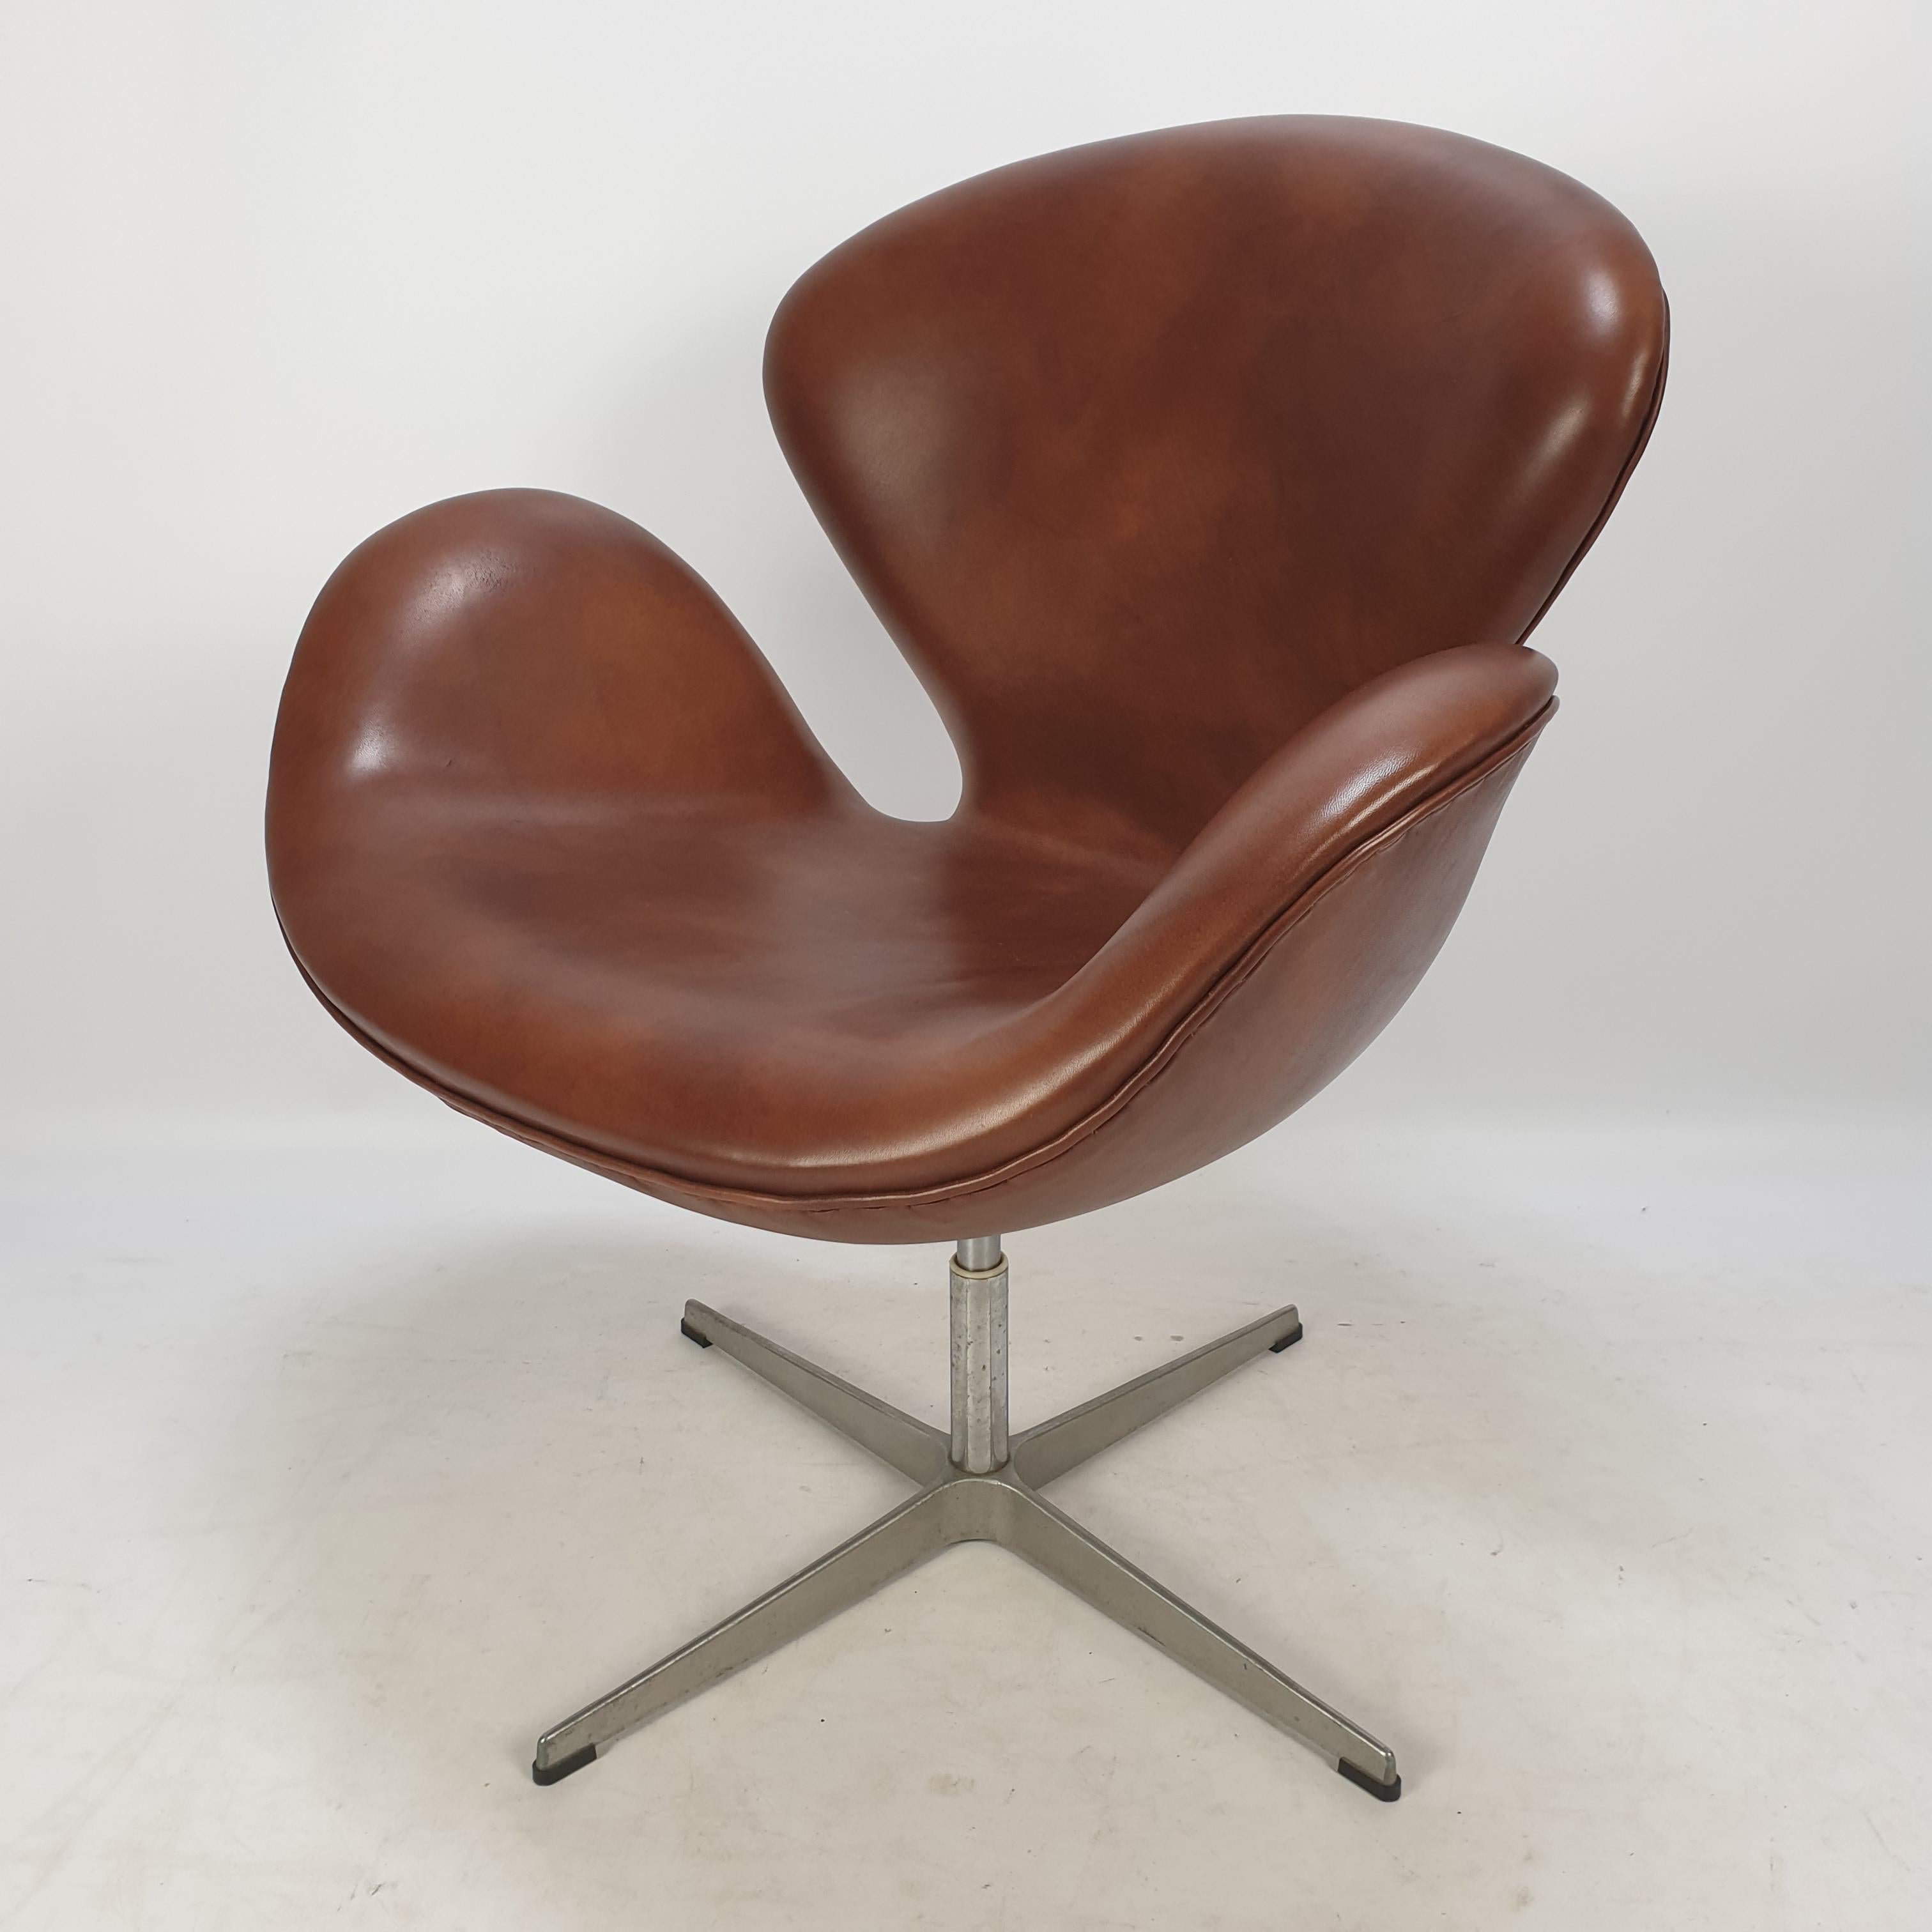 Beautiful brown leather Swan chair. Produced by Fritz Hansen in 1980 (see the label) and designed by Arne Jacobsen in 1958 for the SAS Royal Copenhagen Hotel. This is a very special and rare edition, it is possible to change the seat hight from 41